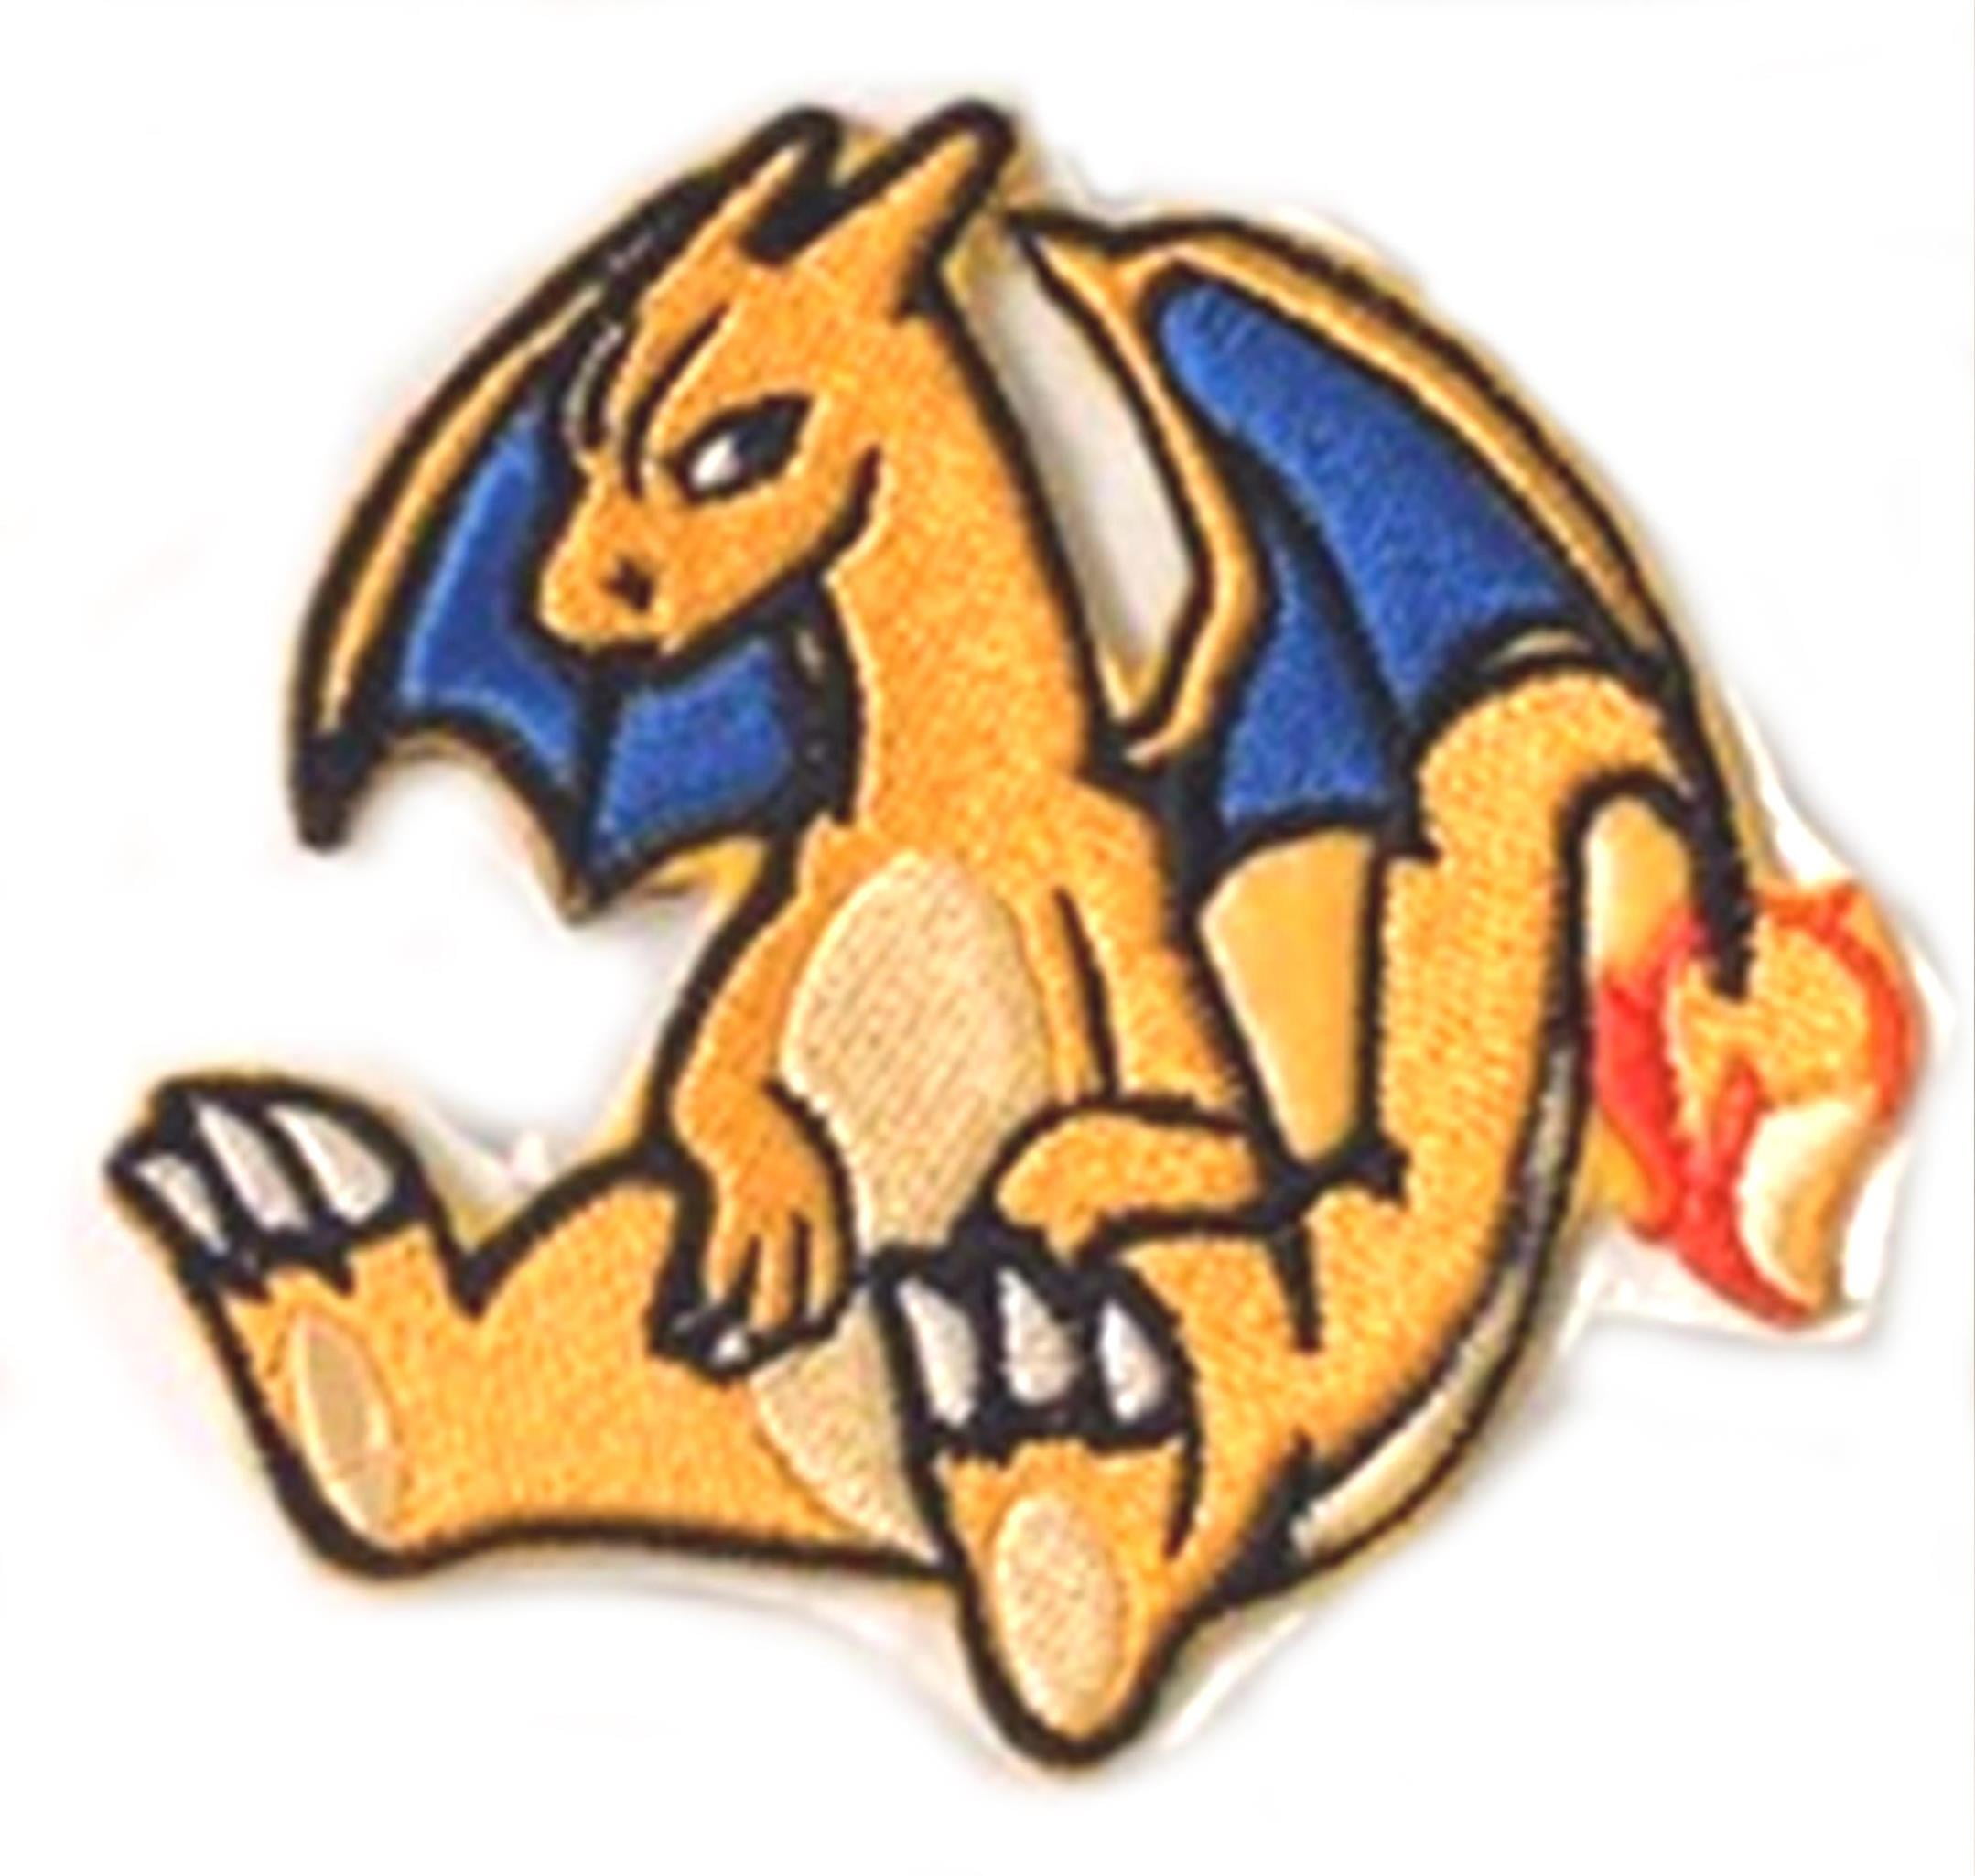 Shiny Mega Mega Charizard Y Pokemon X And Y Char Iron on Transfer Patches  for Kids Clothing DIY Badge Washable Stickers Applique on Clothes Heat  Press